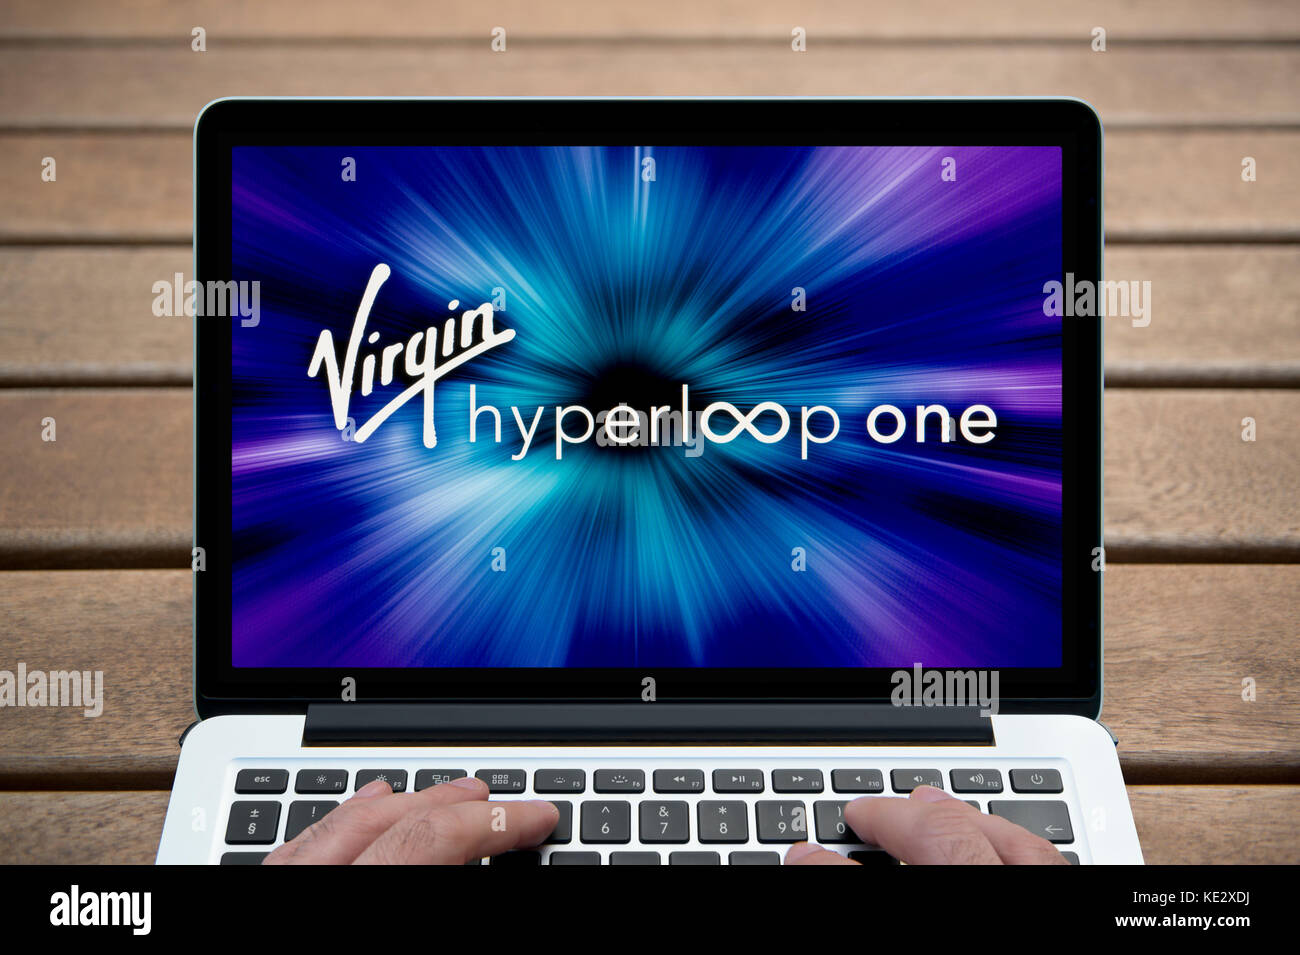 The Virgin Hyperloop One logo is shown on the screen of a MacBook Pro laptop, shot against a wooden bench including a man's fingers (Editorial only). Stock Photo